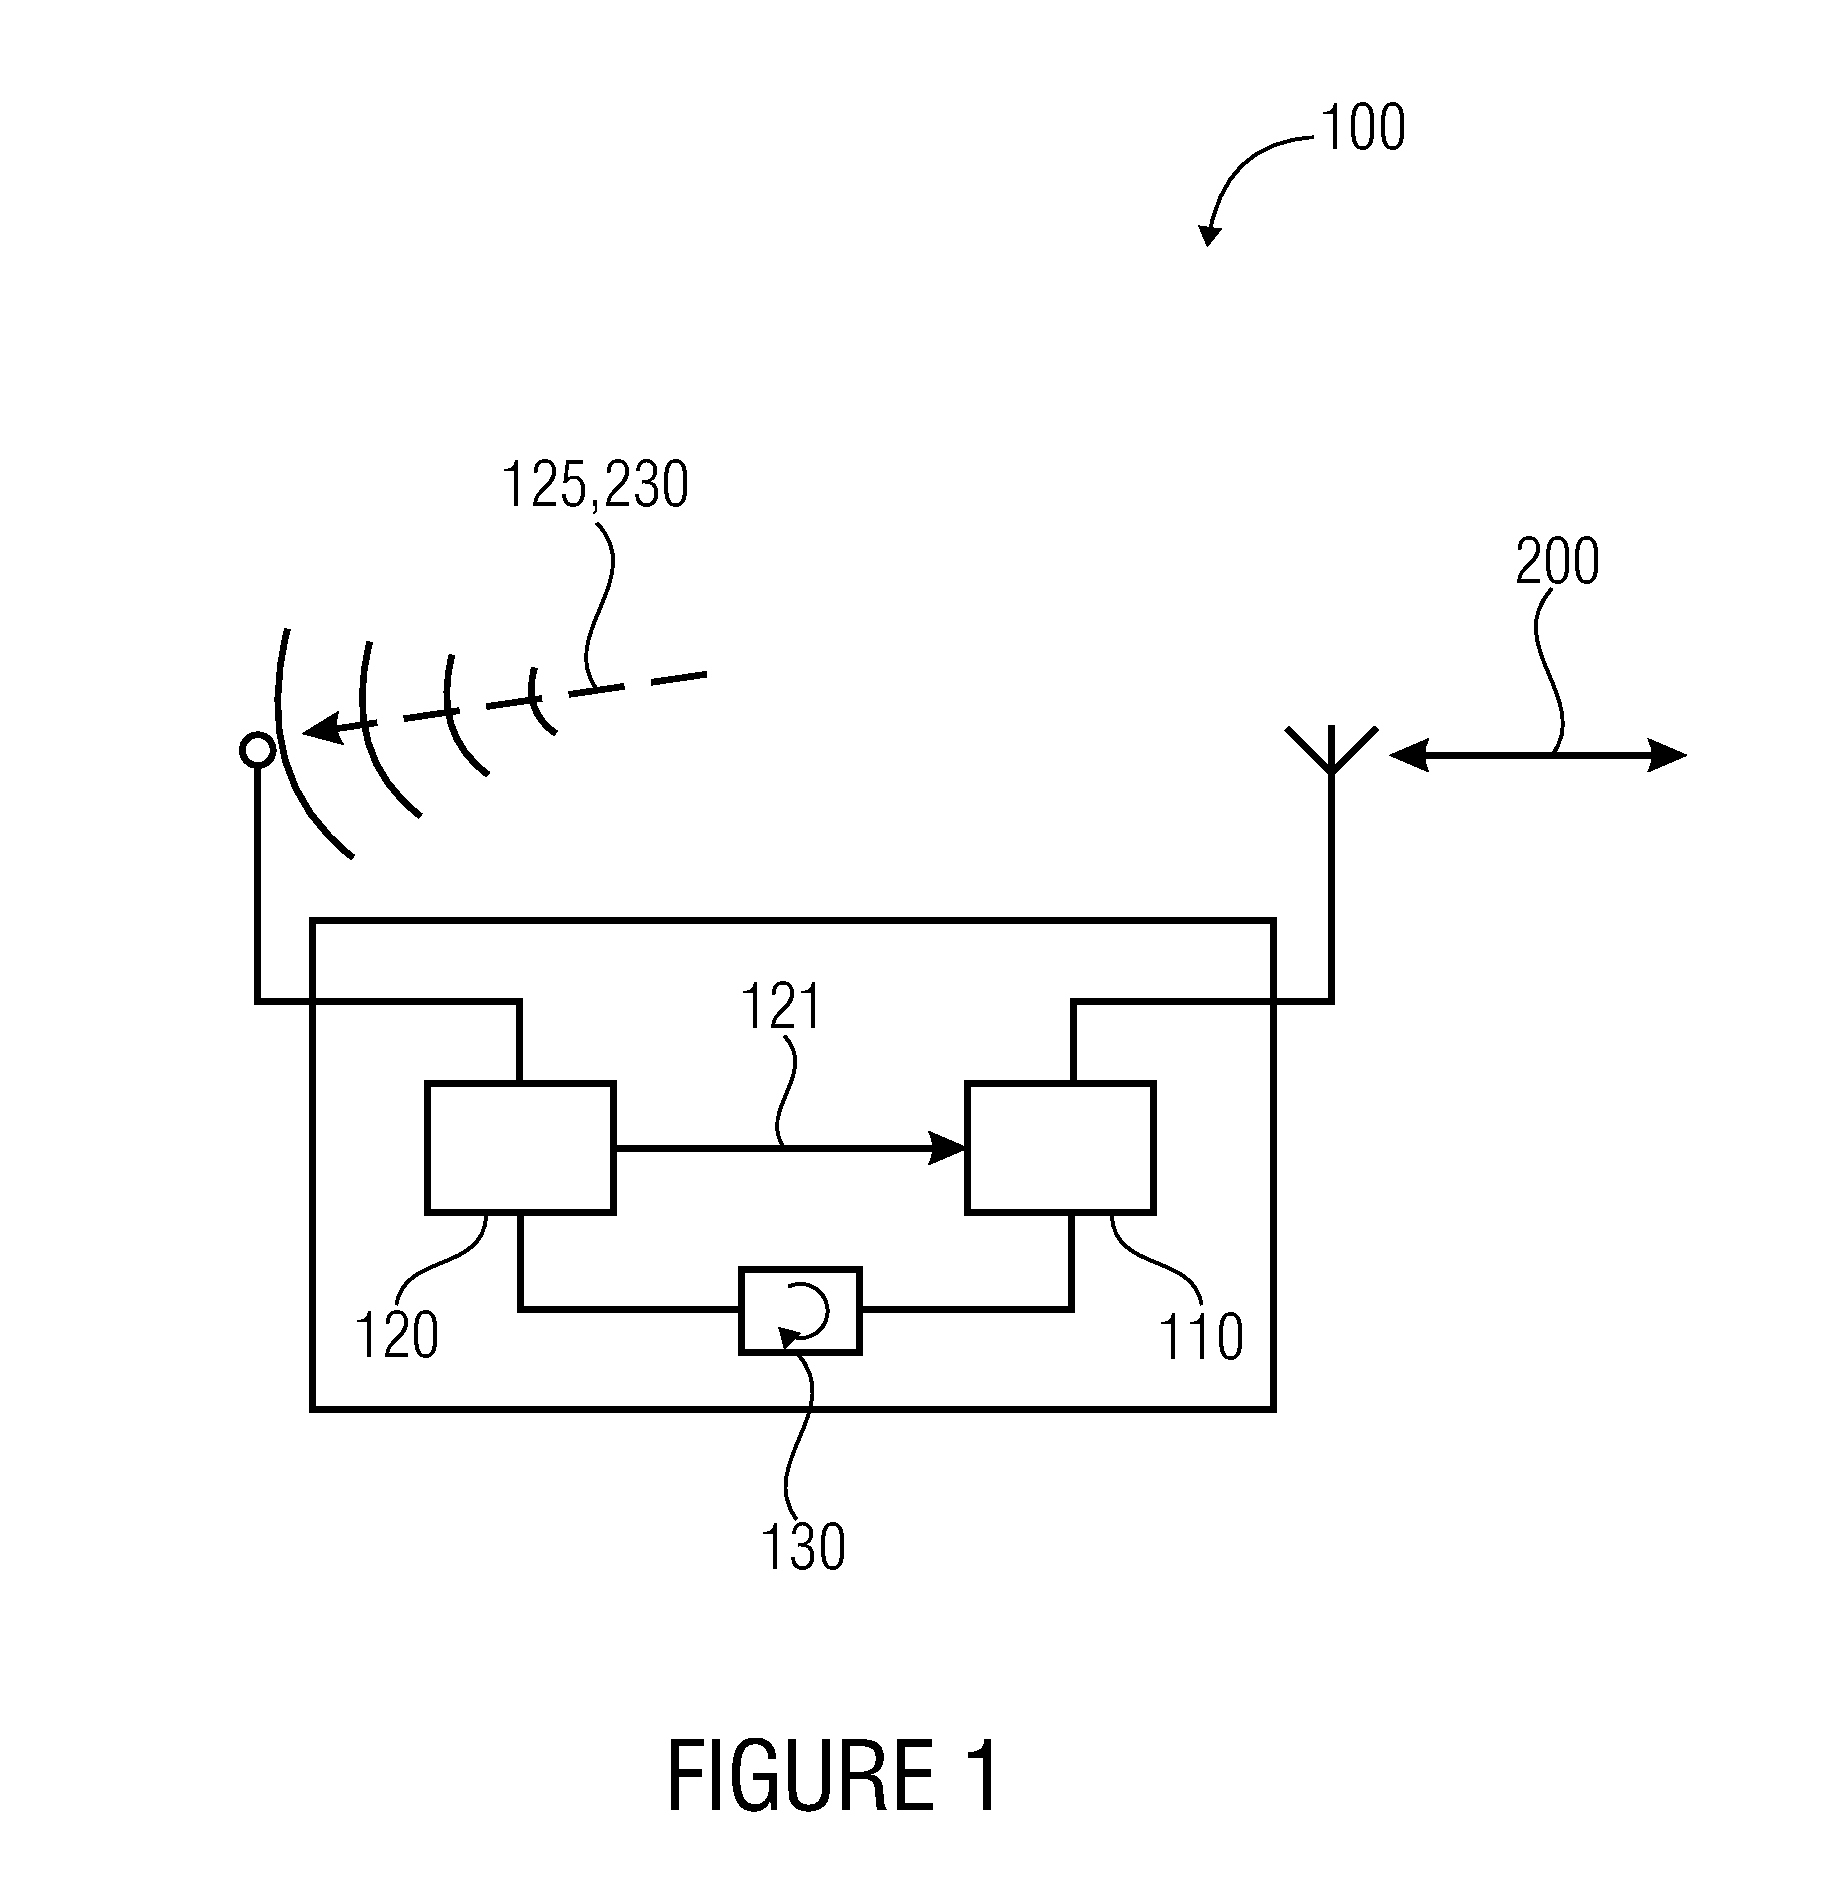 Data transmission device and a method for activating a data transmission